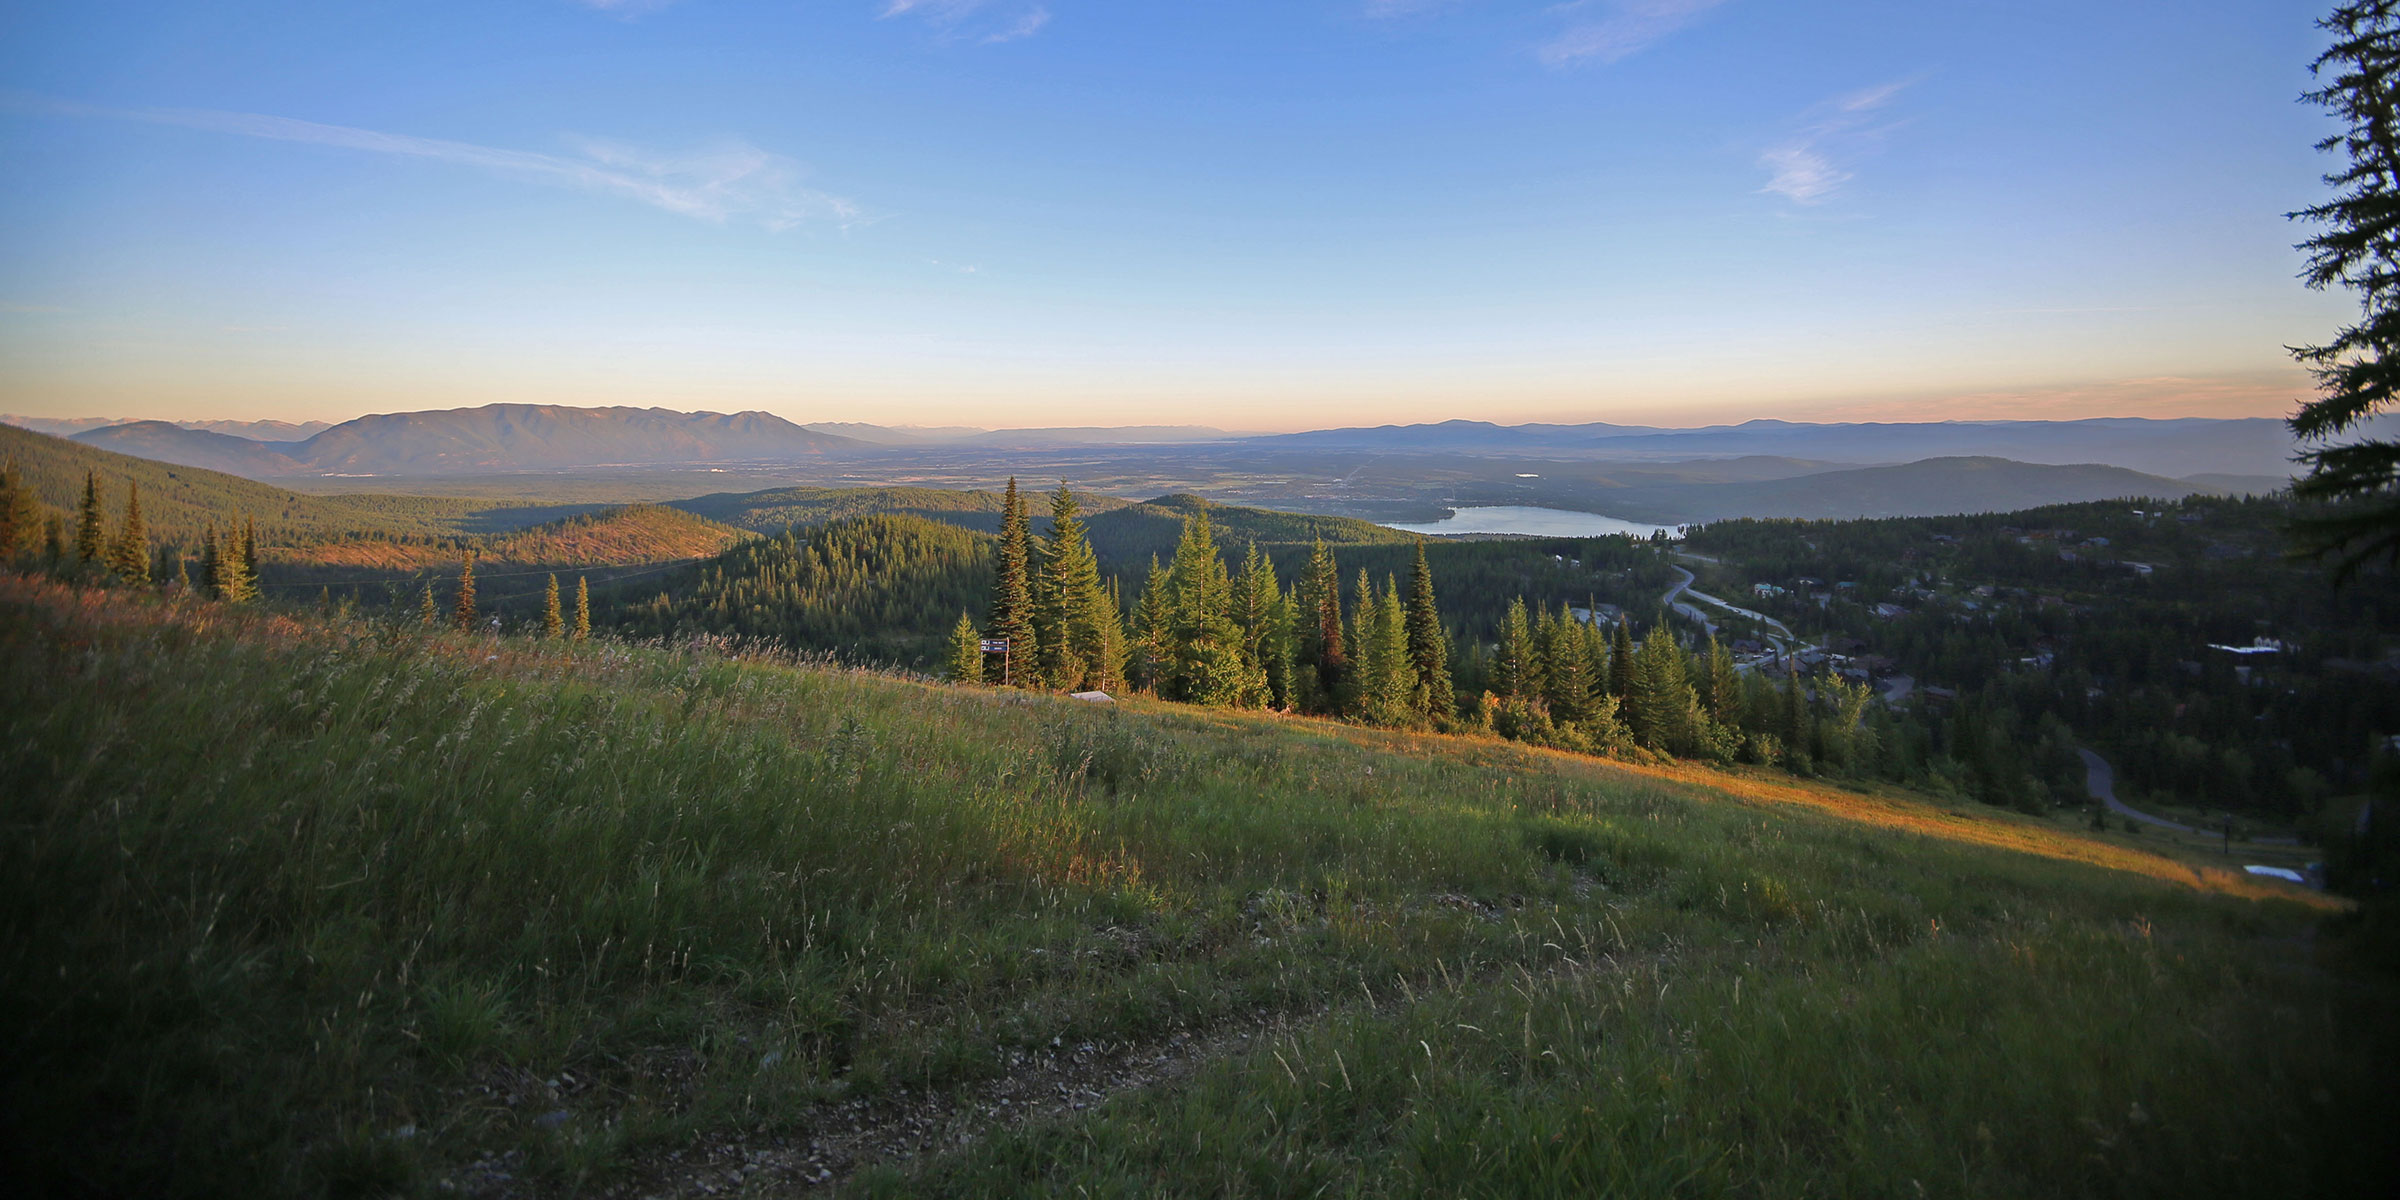 Looking south down the Flathead Valley